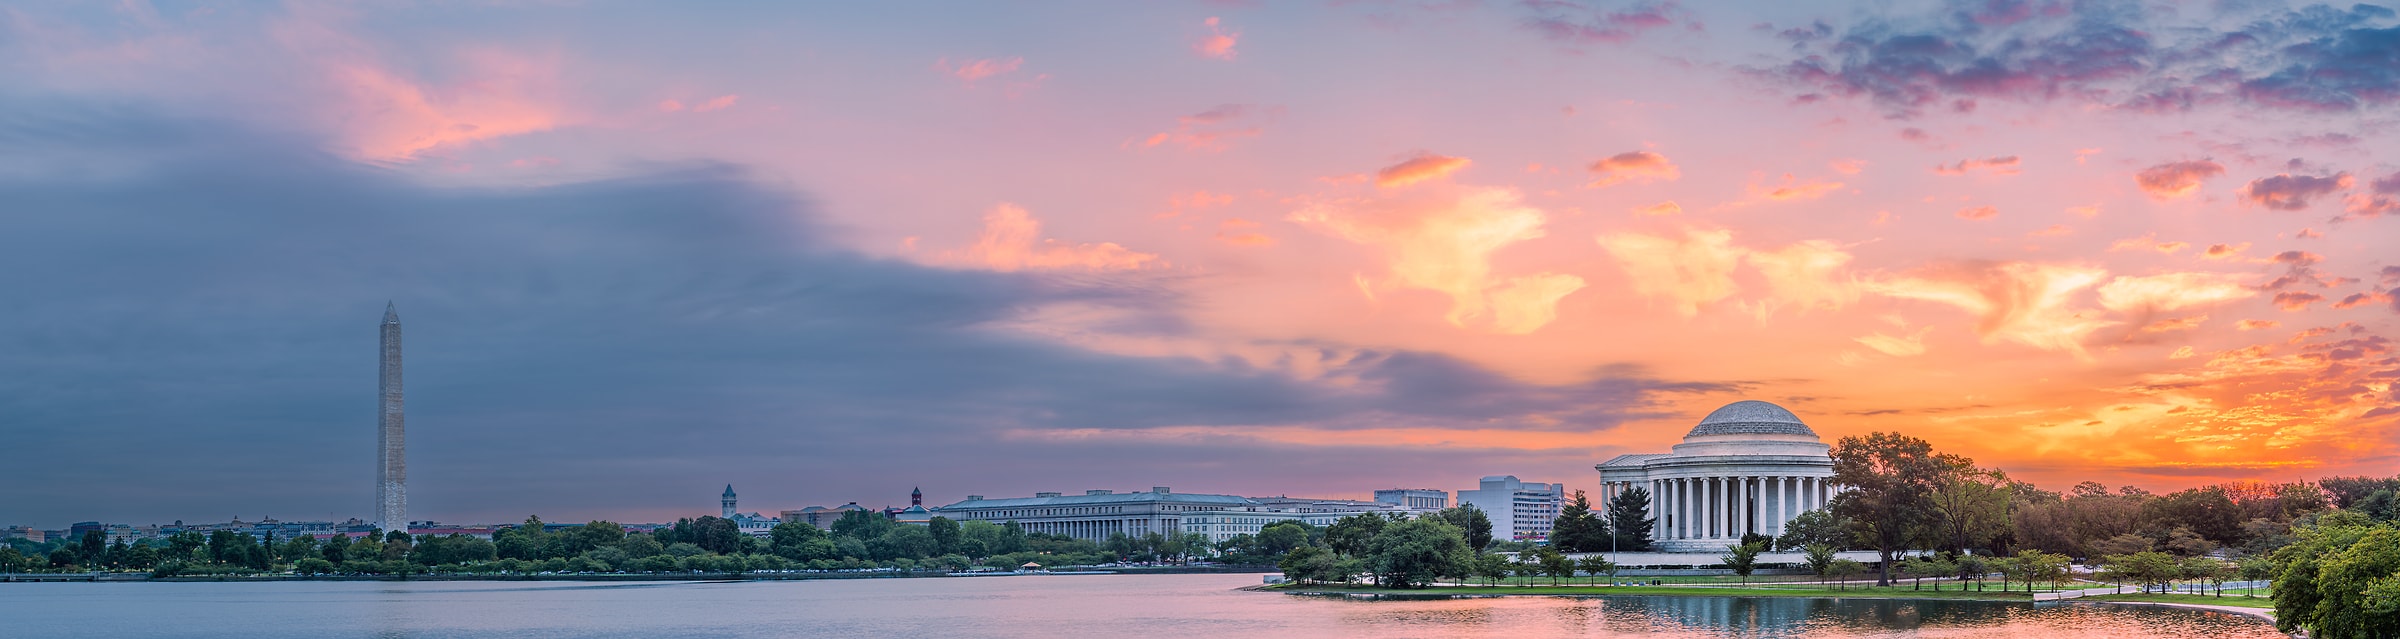 273 megapixels! A very high resolution, large-format VAST photo print of the Washington Monument, Jefferson Memorial, and Tidal Basin at sunrise; photograph created by Tim Lo Monaco in The National Mall, Washington, D.C.